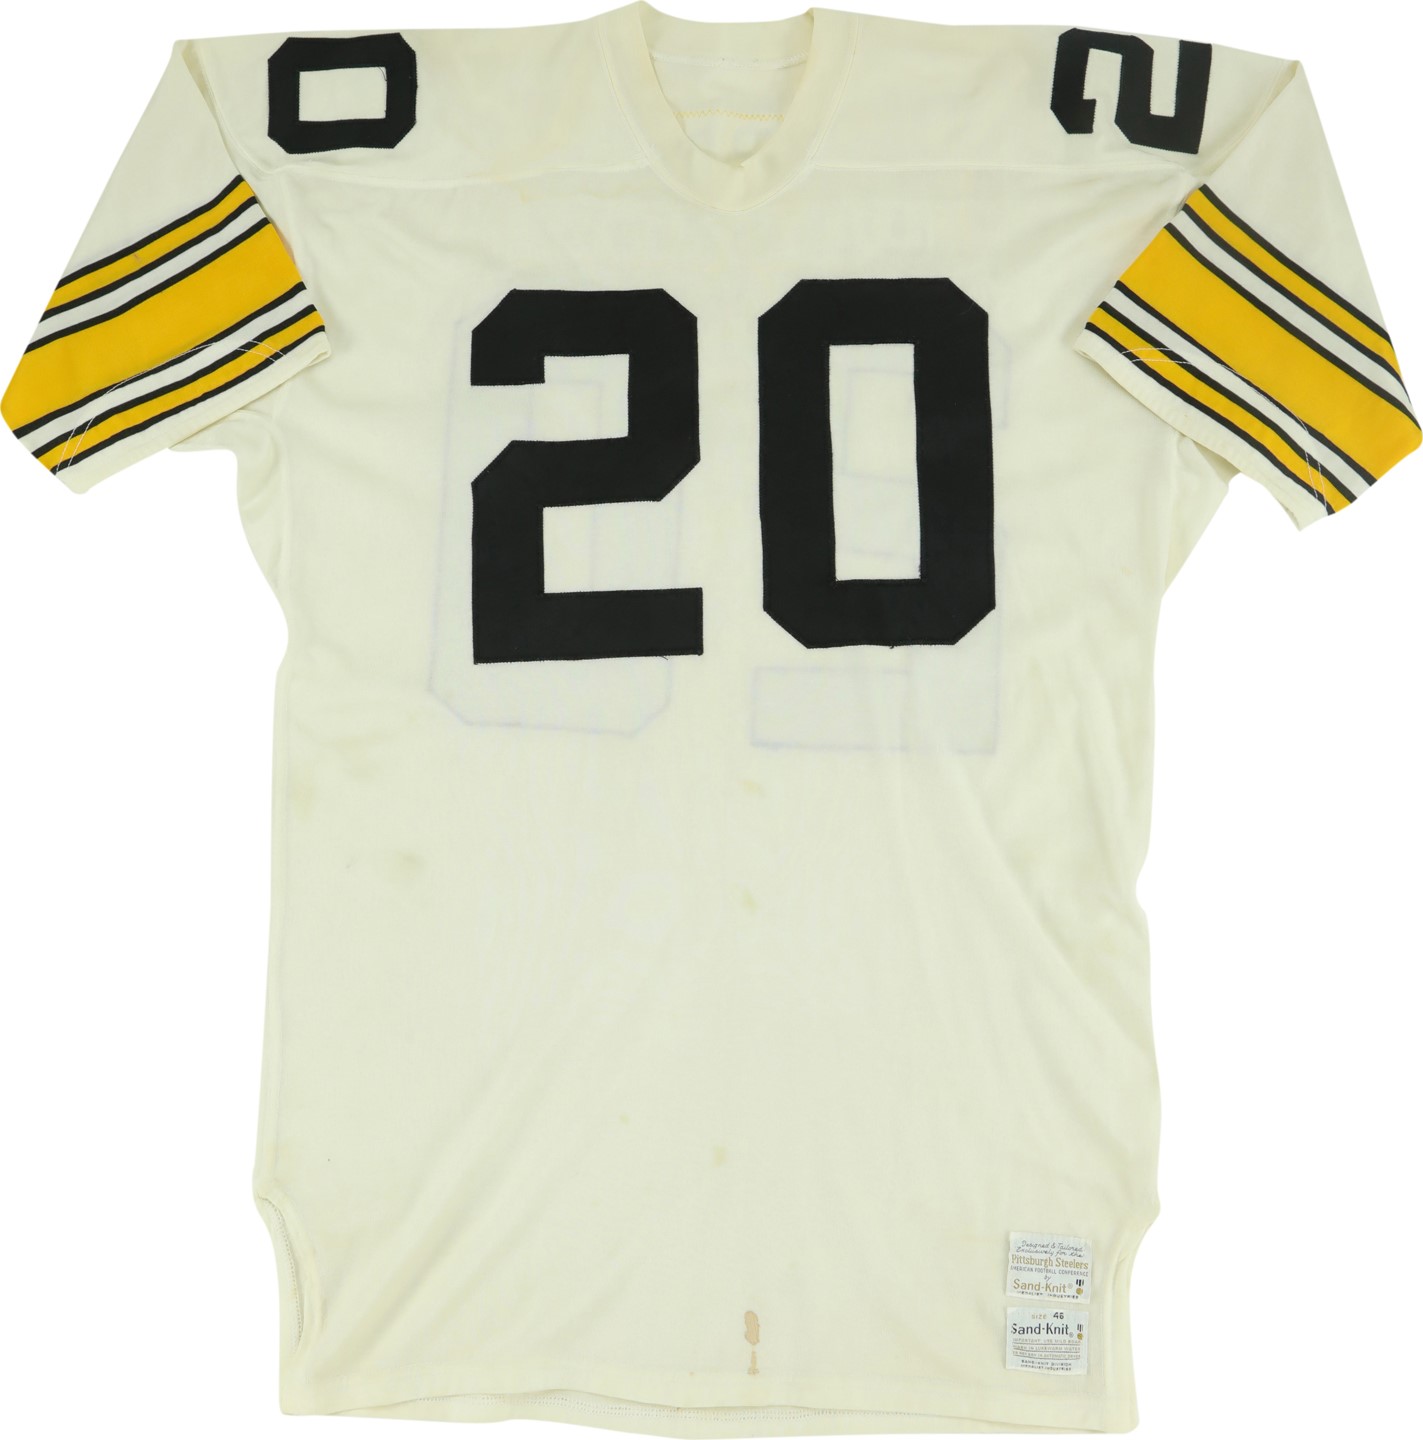 - Rocky Bleier Pittsburgh Steelers Game Issued Jersey Gifted to Robert Urich (Urich Family Letter)